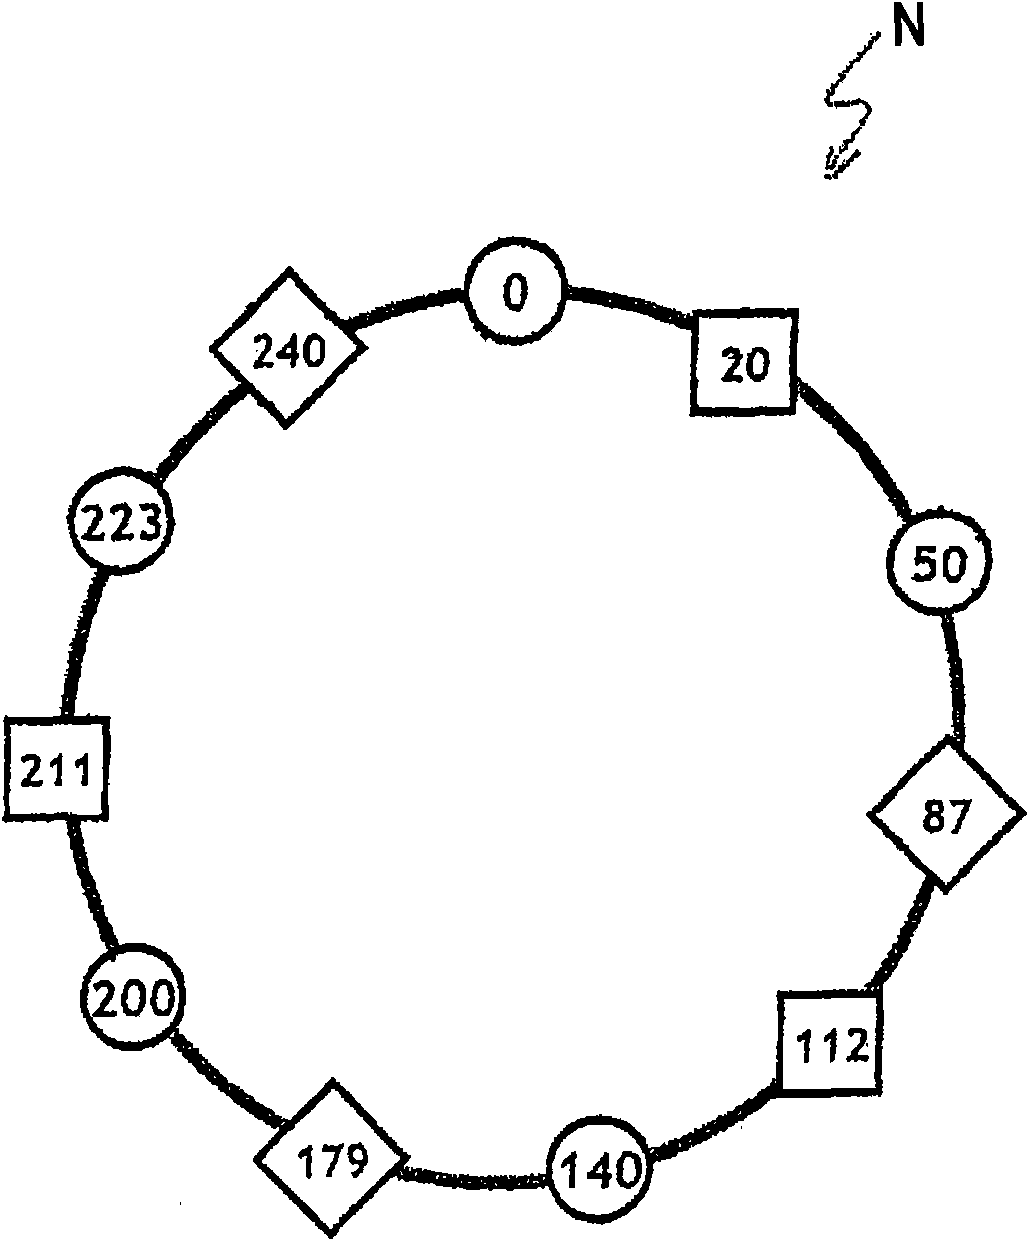 Method of determining a routing path